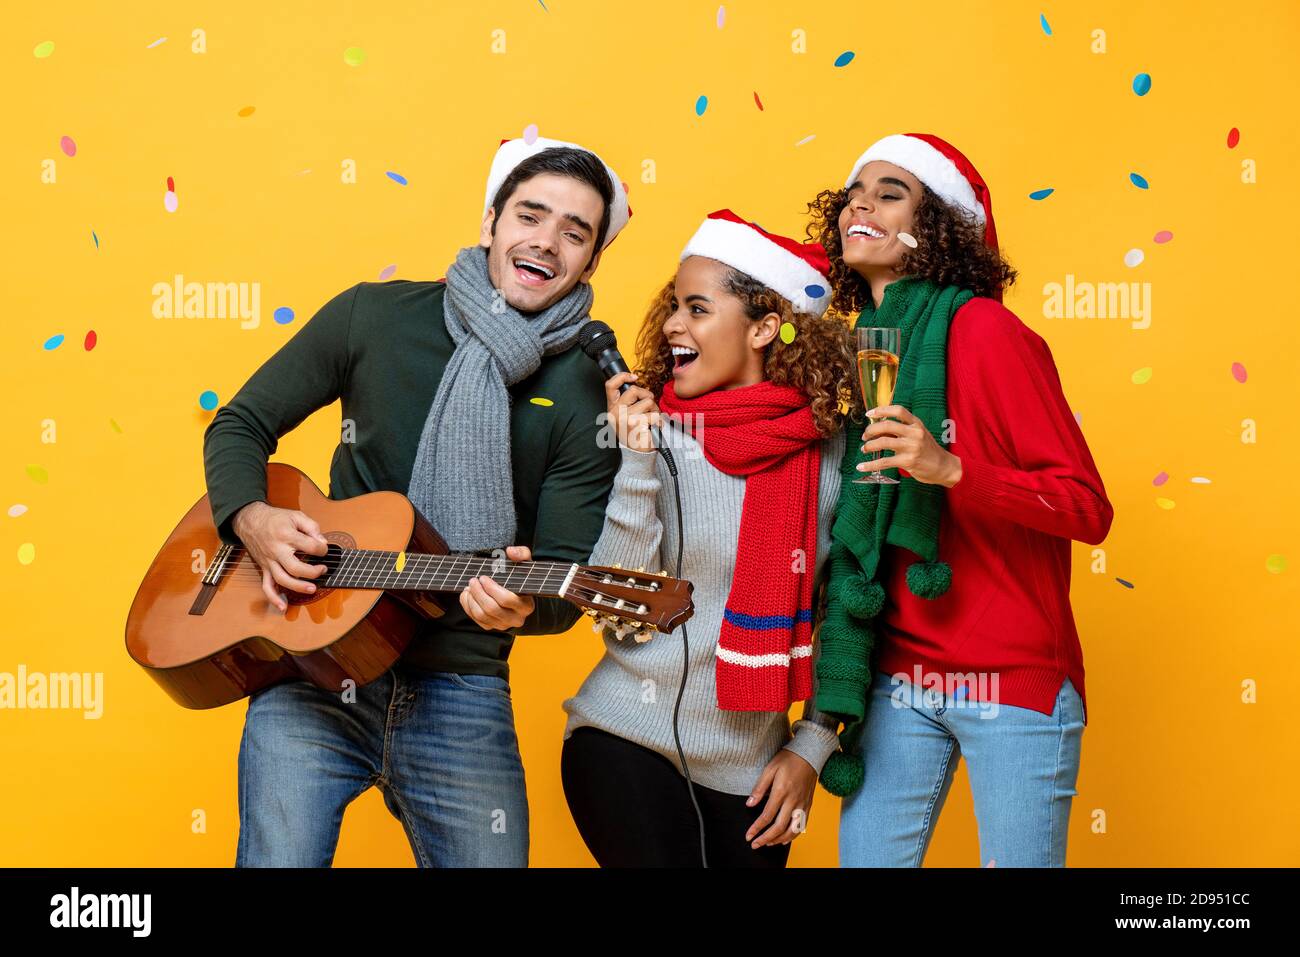 Happy three multiracial friends singing together in Christmas celebration party on yellow studio background with confetti Stock Photo